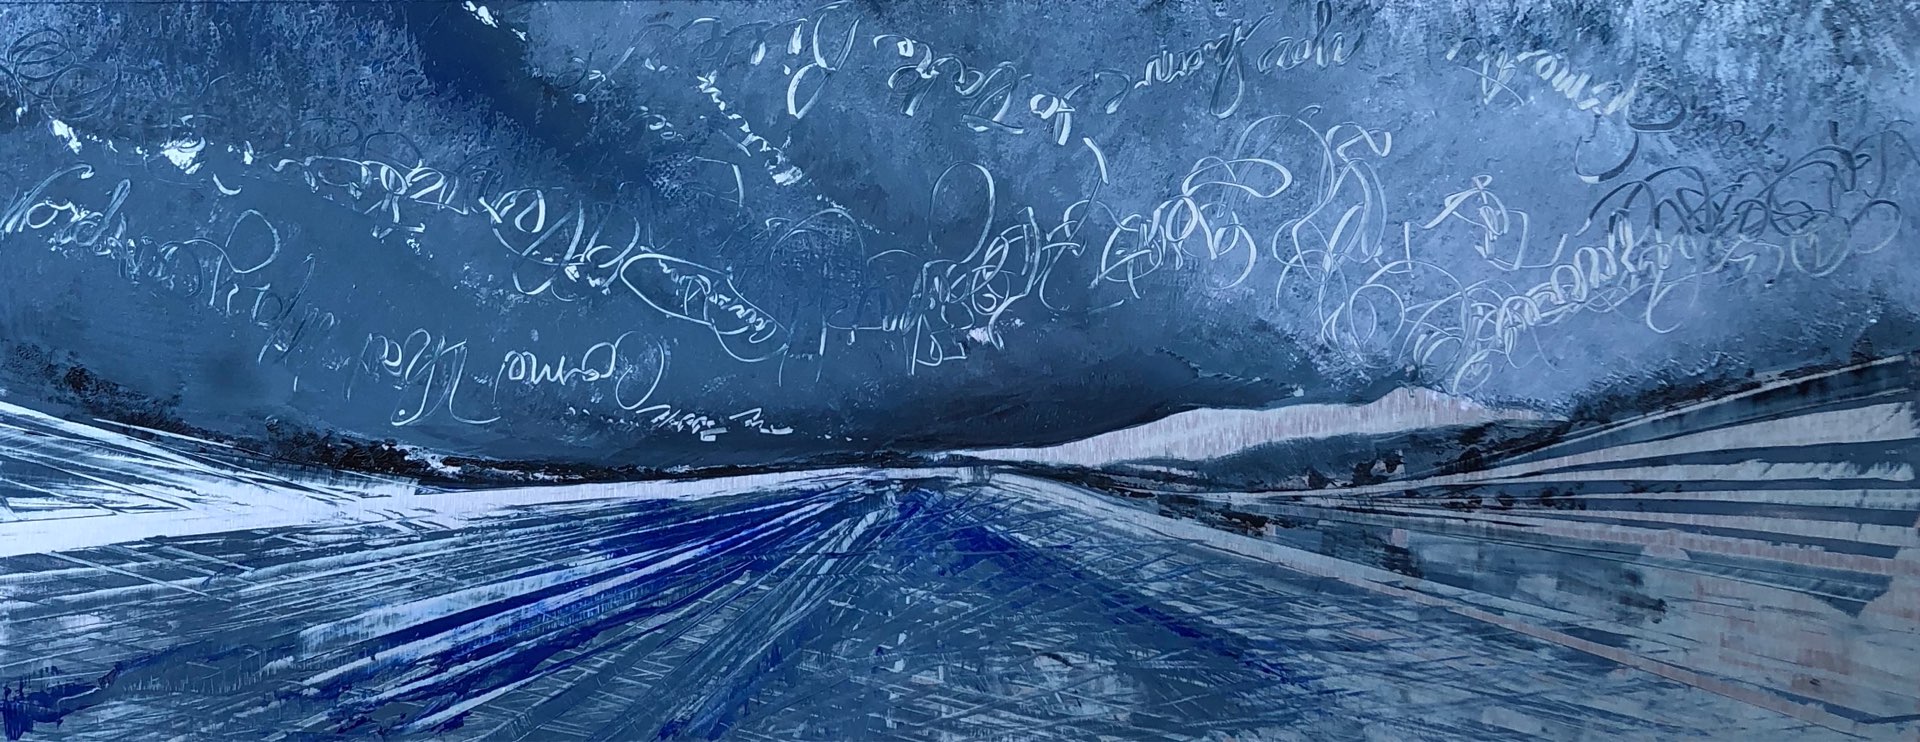 Words of positivity are inverted into the clouds of the deep blue sky while the road rockets you to the horizon in this contemporary storm painting.